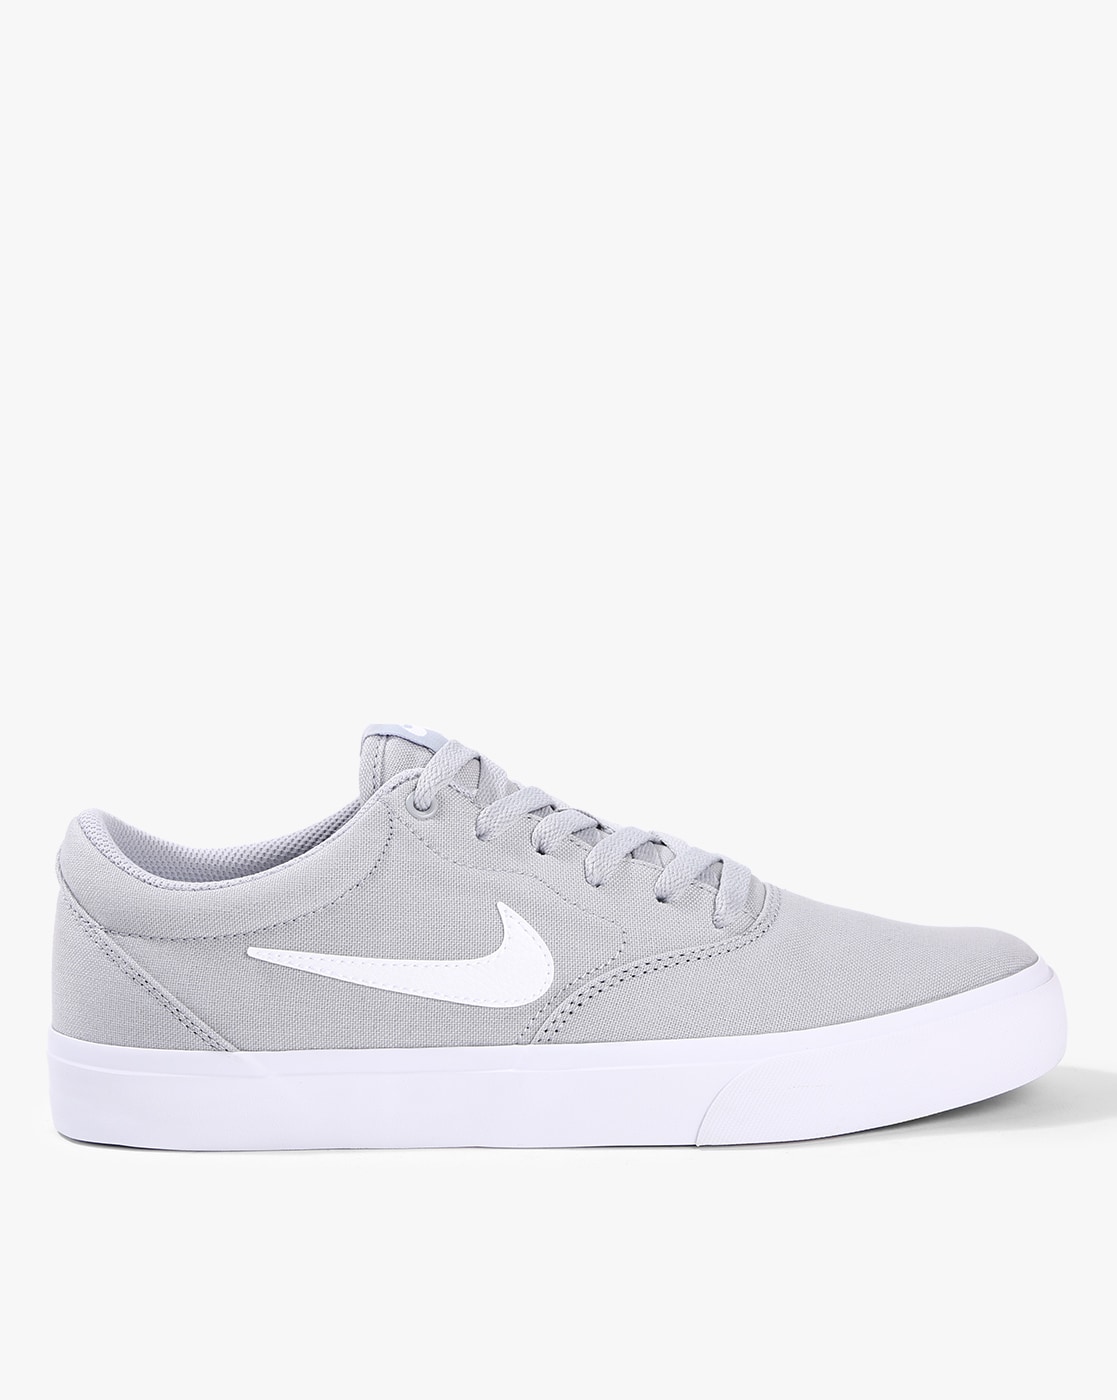 grey nike shoes for men